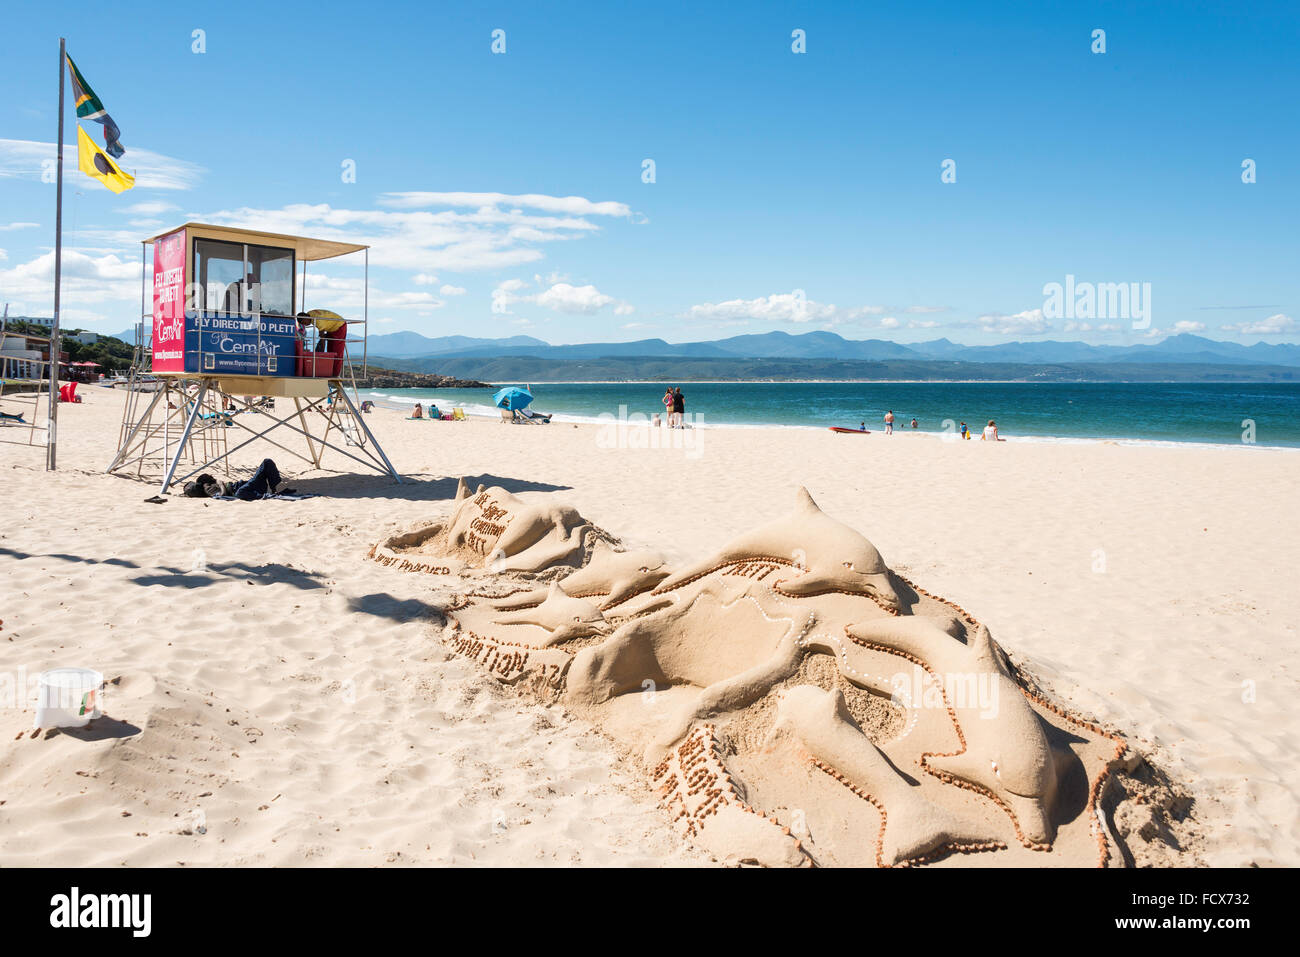 Lifeguard tower and sand sculptures at Beacon Island Beach, Plettenberg Bay, Eden District, Western Cape Province, South Africa Stock Photo